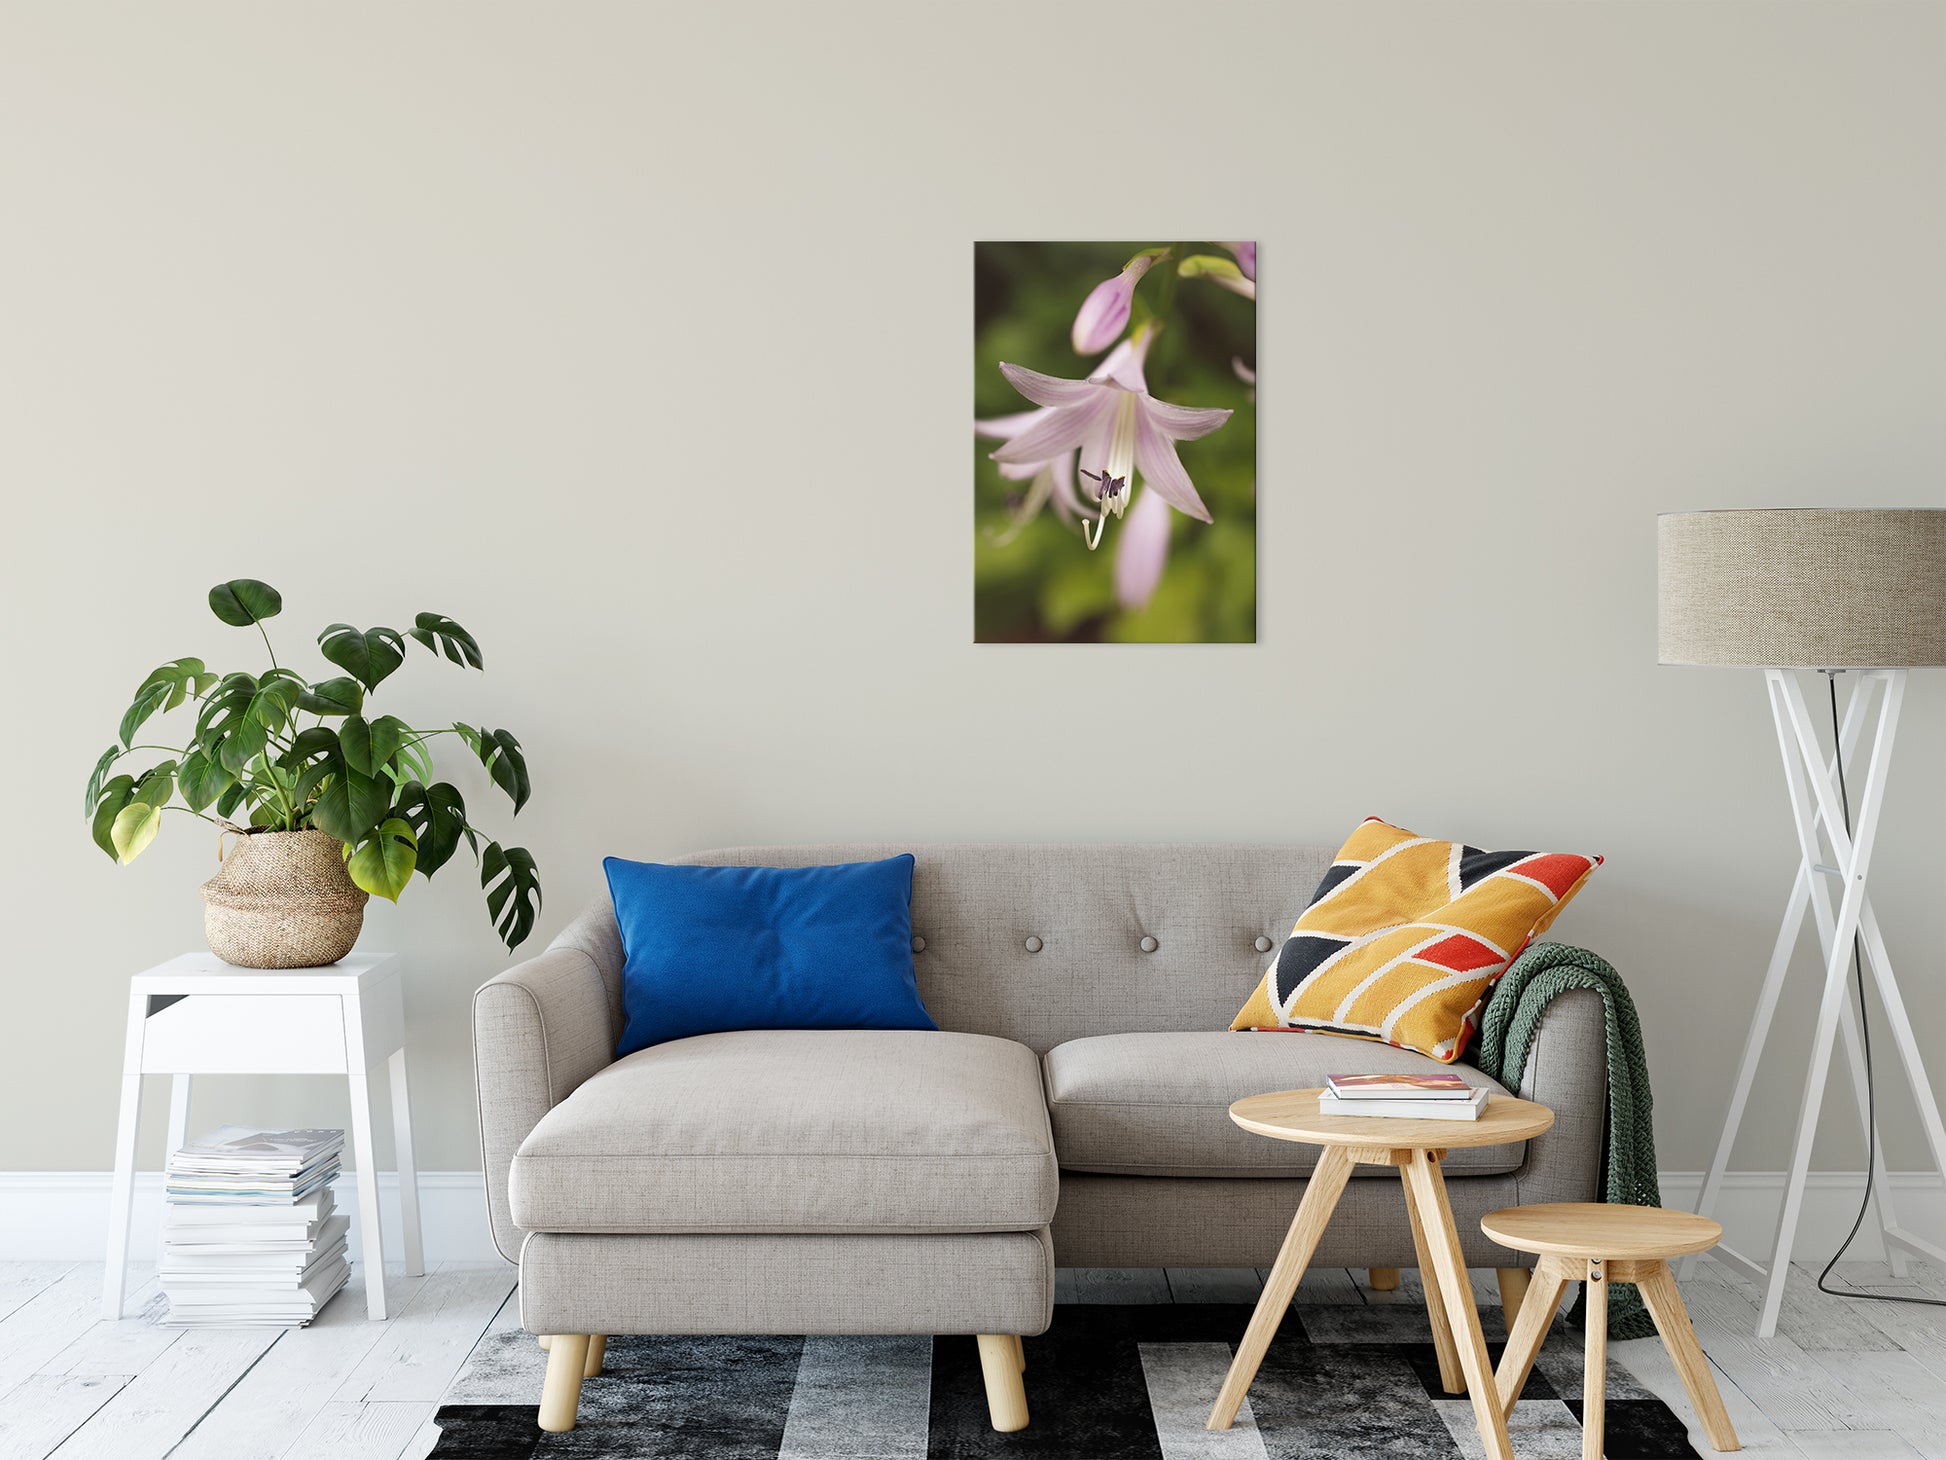 Softened Hosta Bloom Nature / Floral Photo Fine Art Canvas Wall Art Prints 20" x 30" - PIPAFINEART